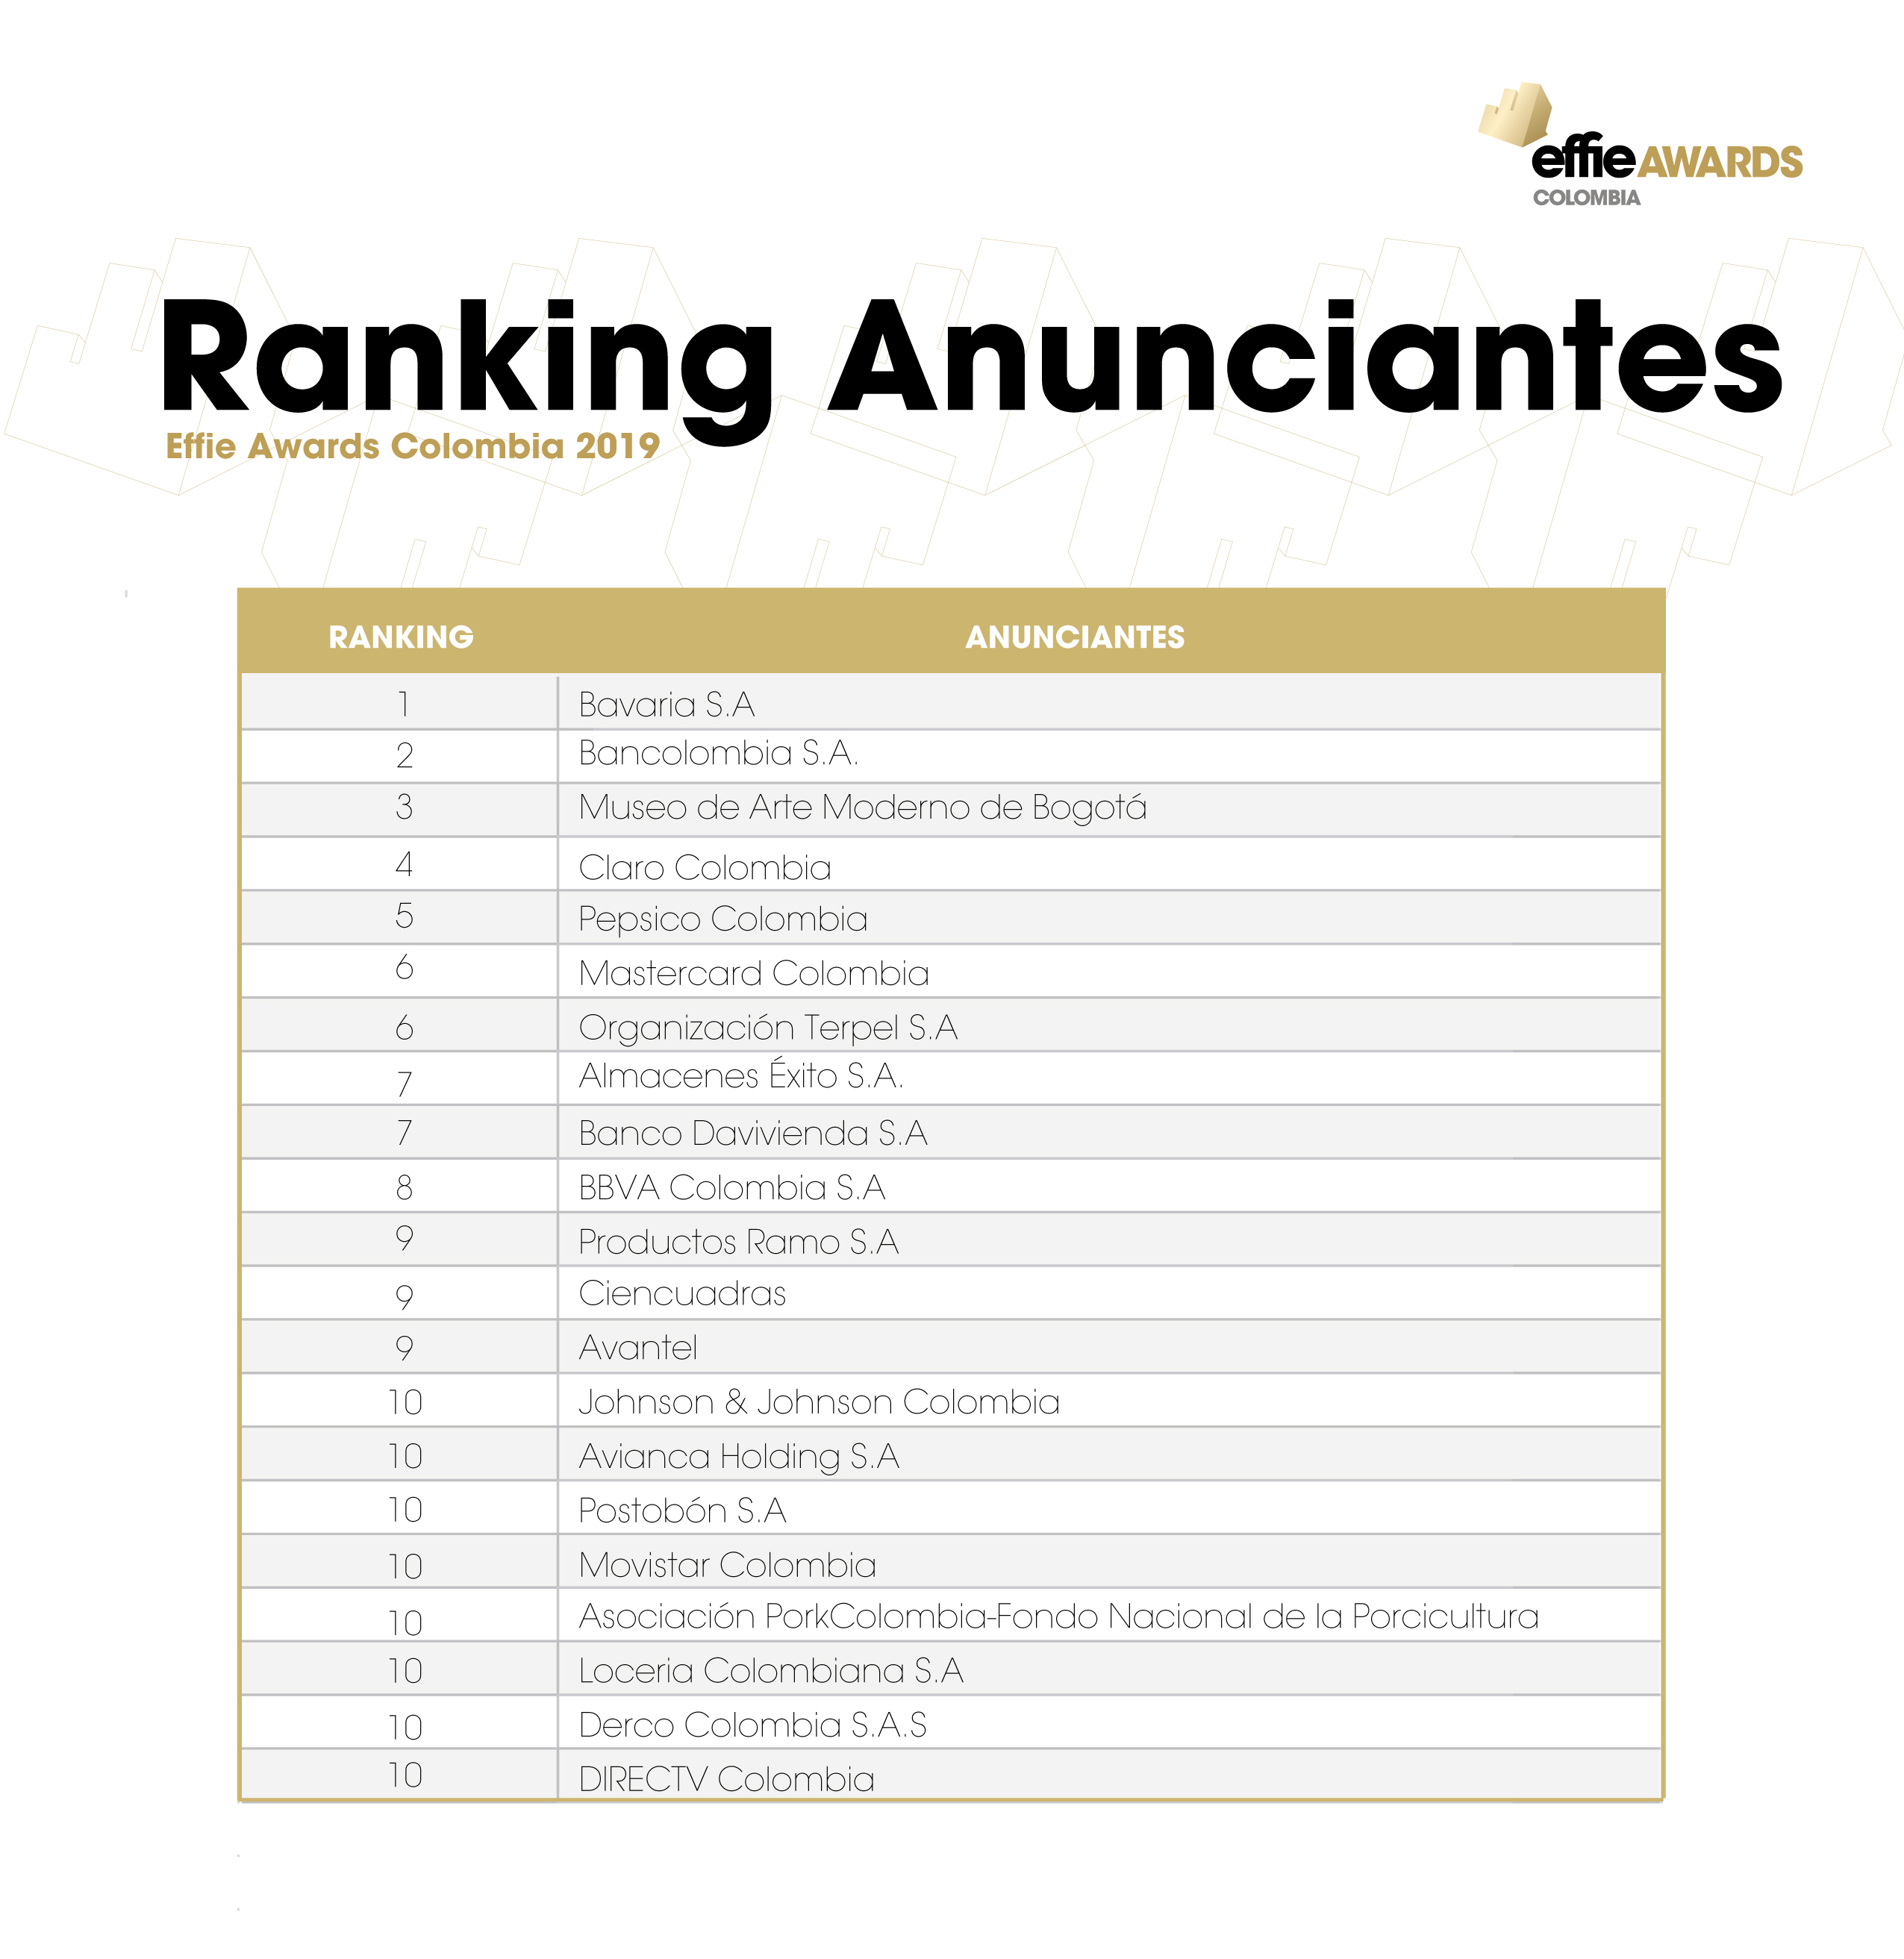 2019.09.30.A Effie Colombia Ranking Anunciantes